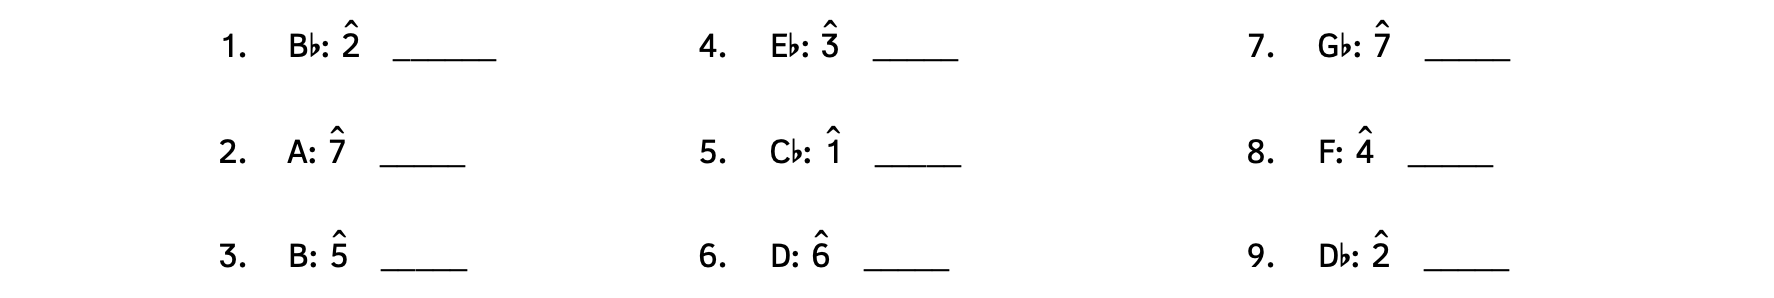 Number 1, scale degree 2 in B-flat major. Number 2, scale degree 7 in A major. Number 3, scale degree 5 in B major. Number 4, scale degree 3 in E-flat major. Number 5, scale degree 1 in C-flat major. Number 6, scale degree 6 in D major. Number 7, scale degree 7 in G-flat major. Number 8, scale degree 4 in F major. Number 9, scale degree 2 in D-flat major.